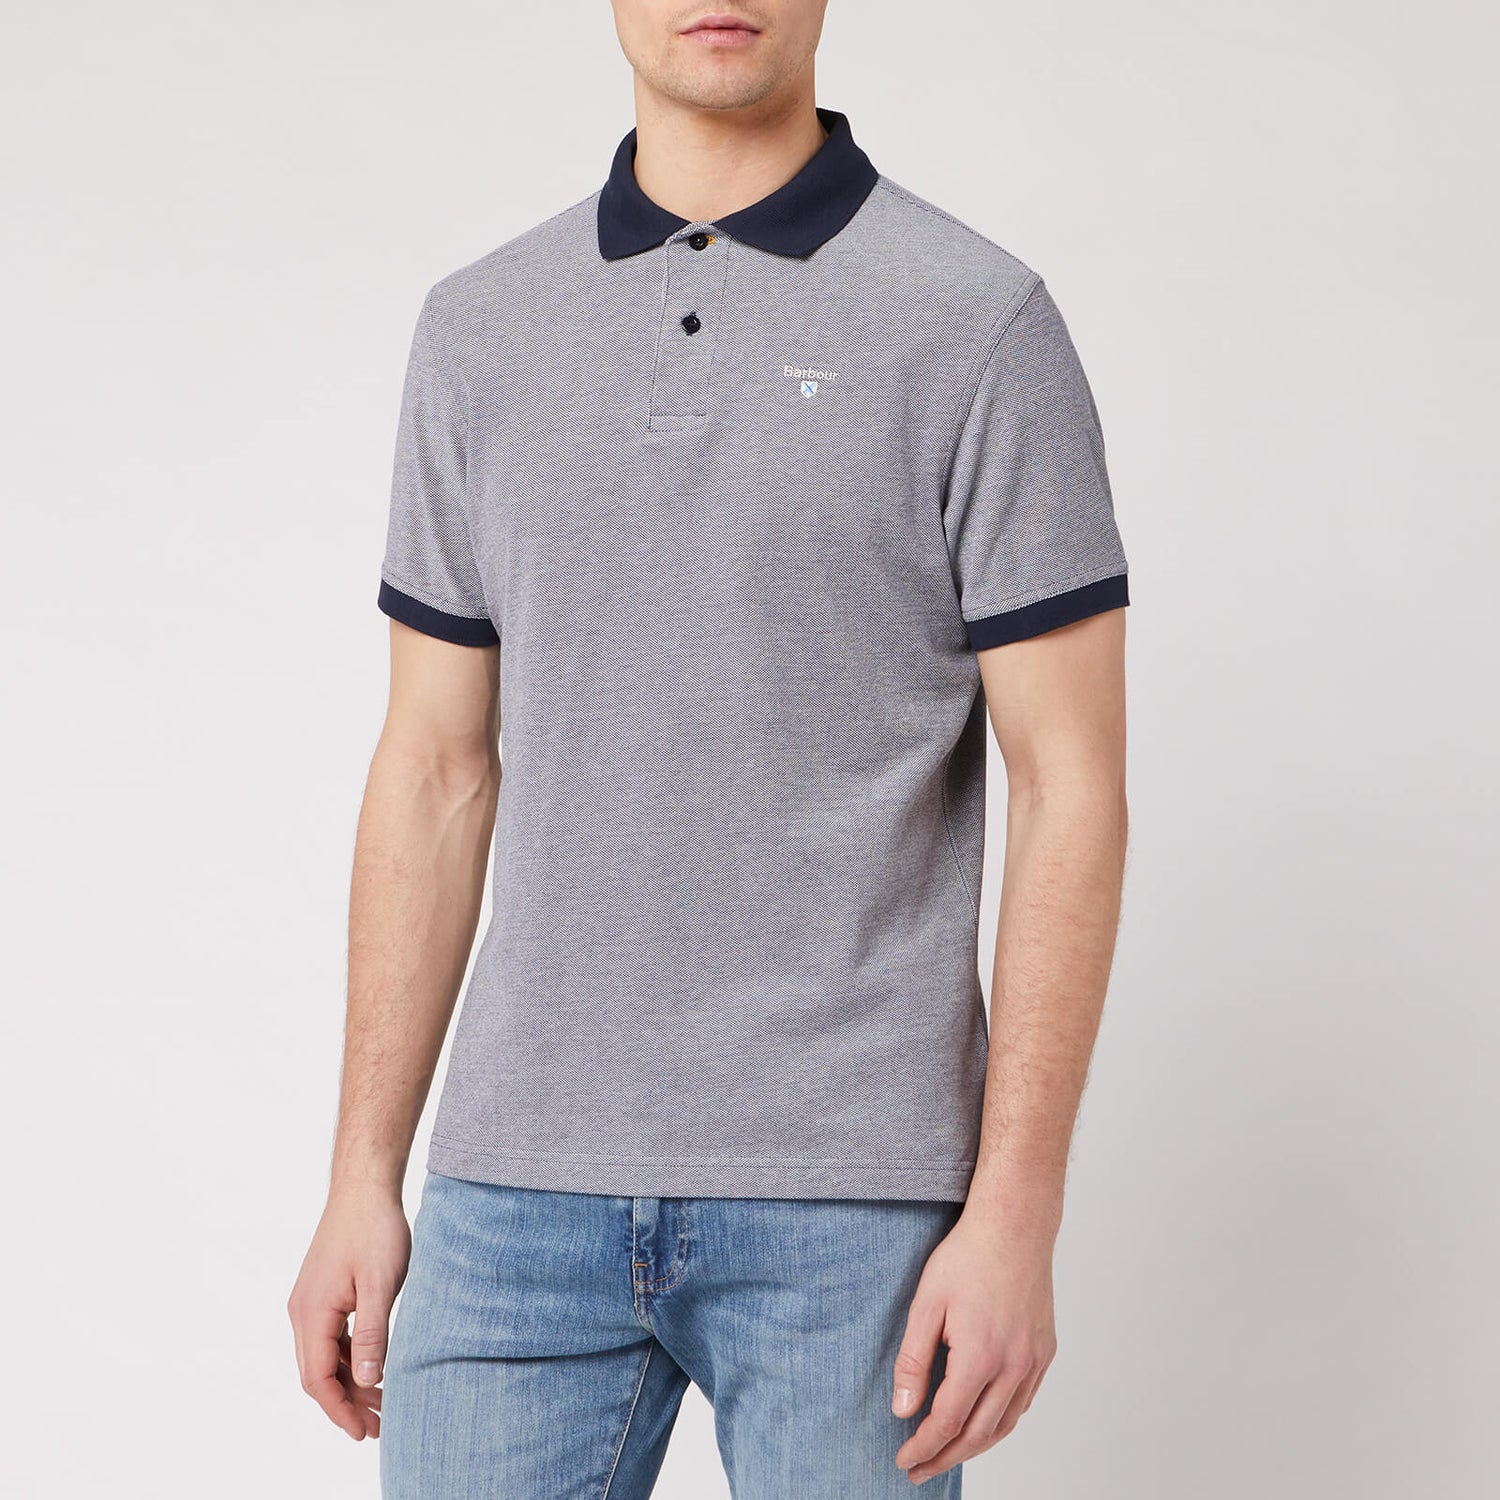 Barbour Men's Sports Polo Mix - Midnight - S